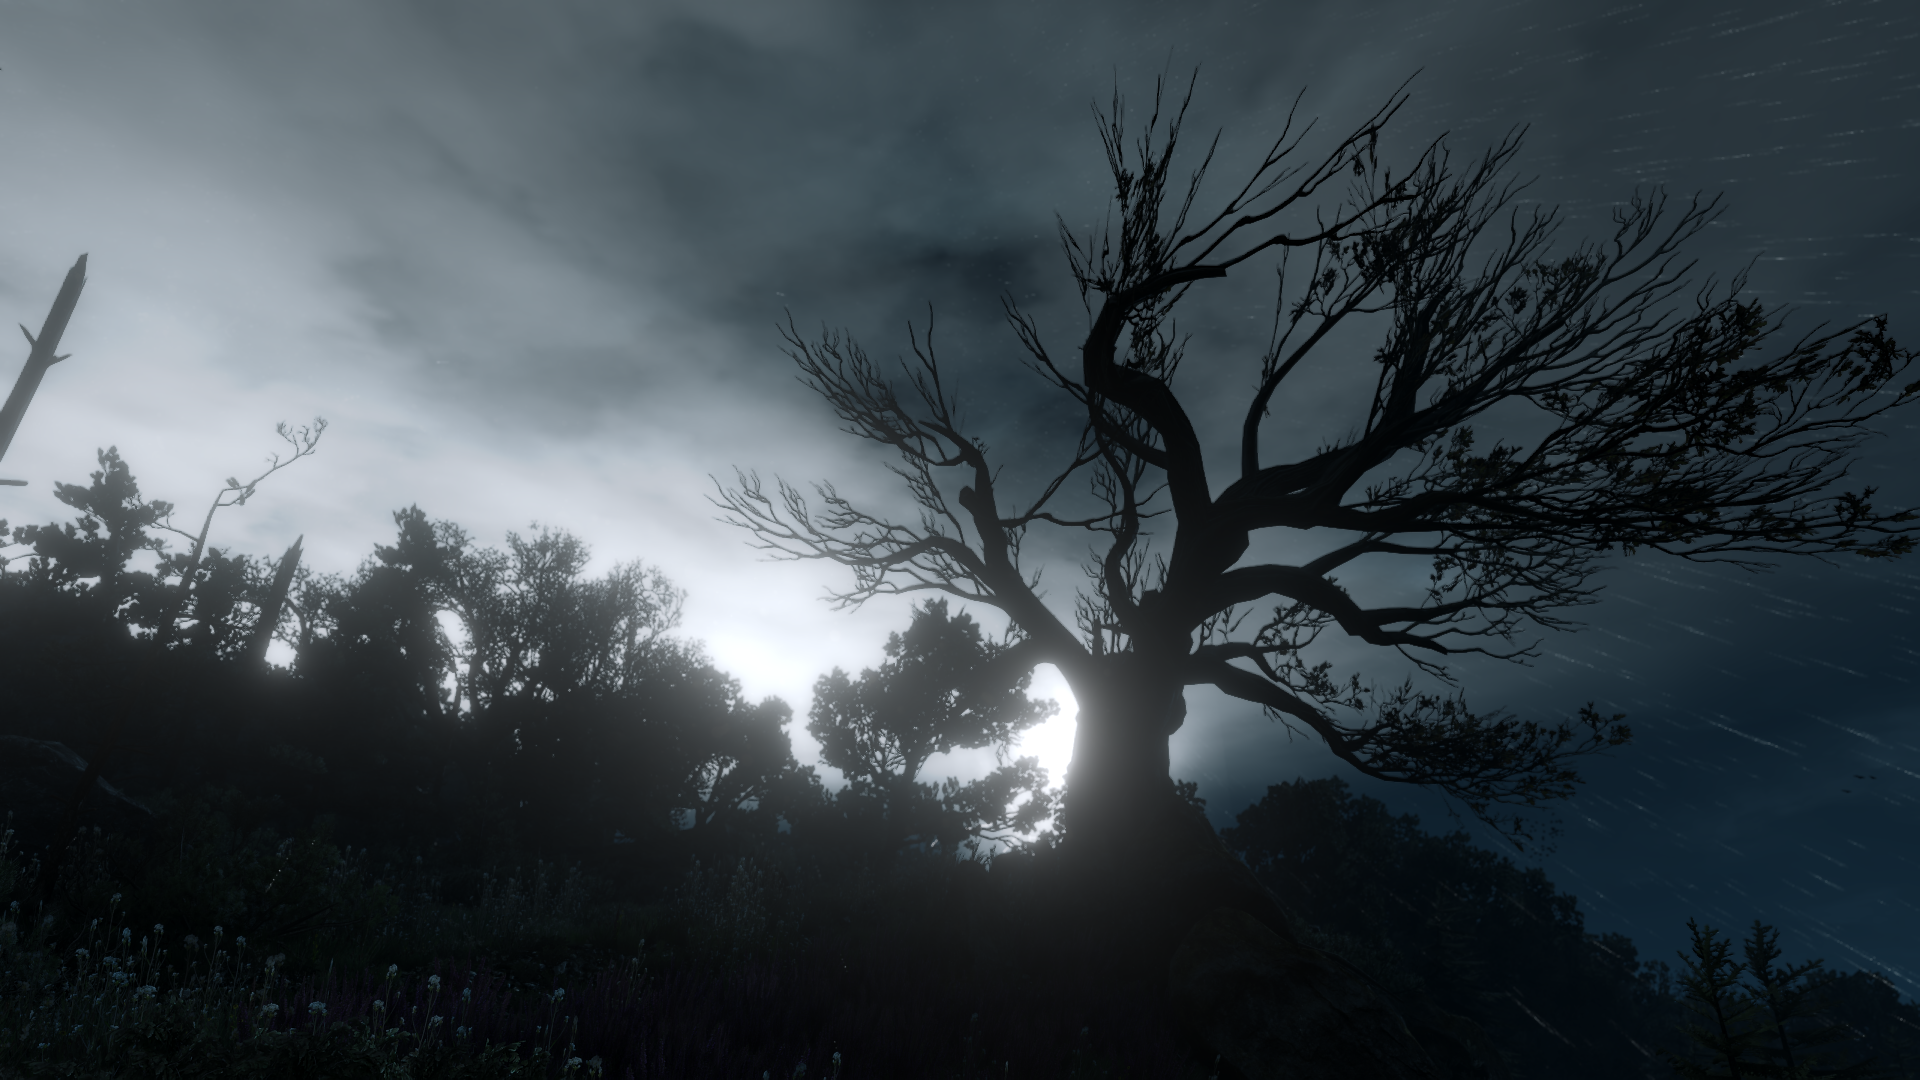 The Witcher 3 Wild Hunt The Witcher Video Game Landscape Medieval Screen Shot 1920x1080